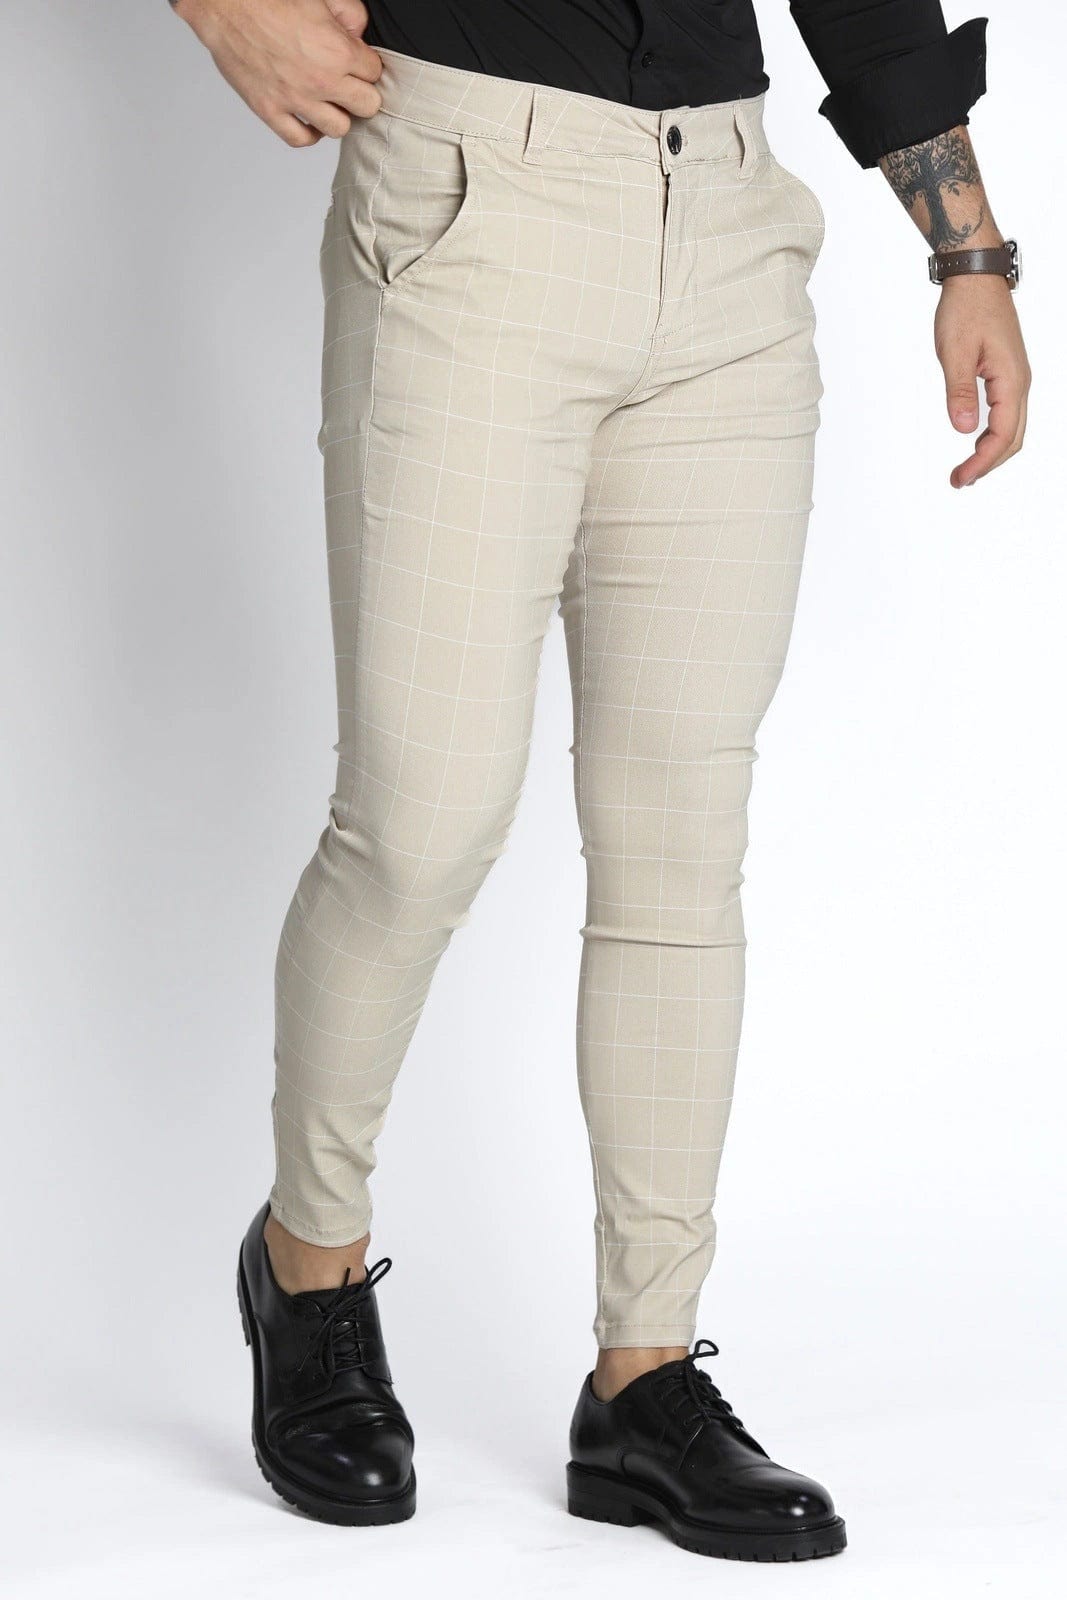 Buy Cream Trousers & Pants for Men by SNITCH Online | Ajio.com